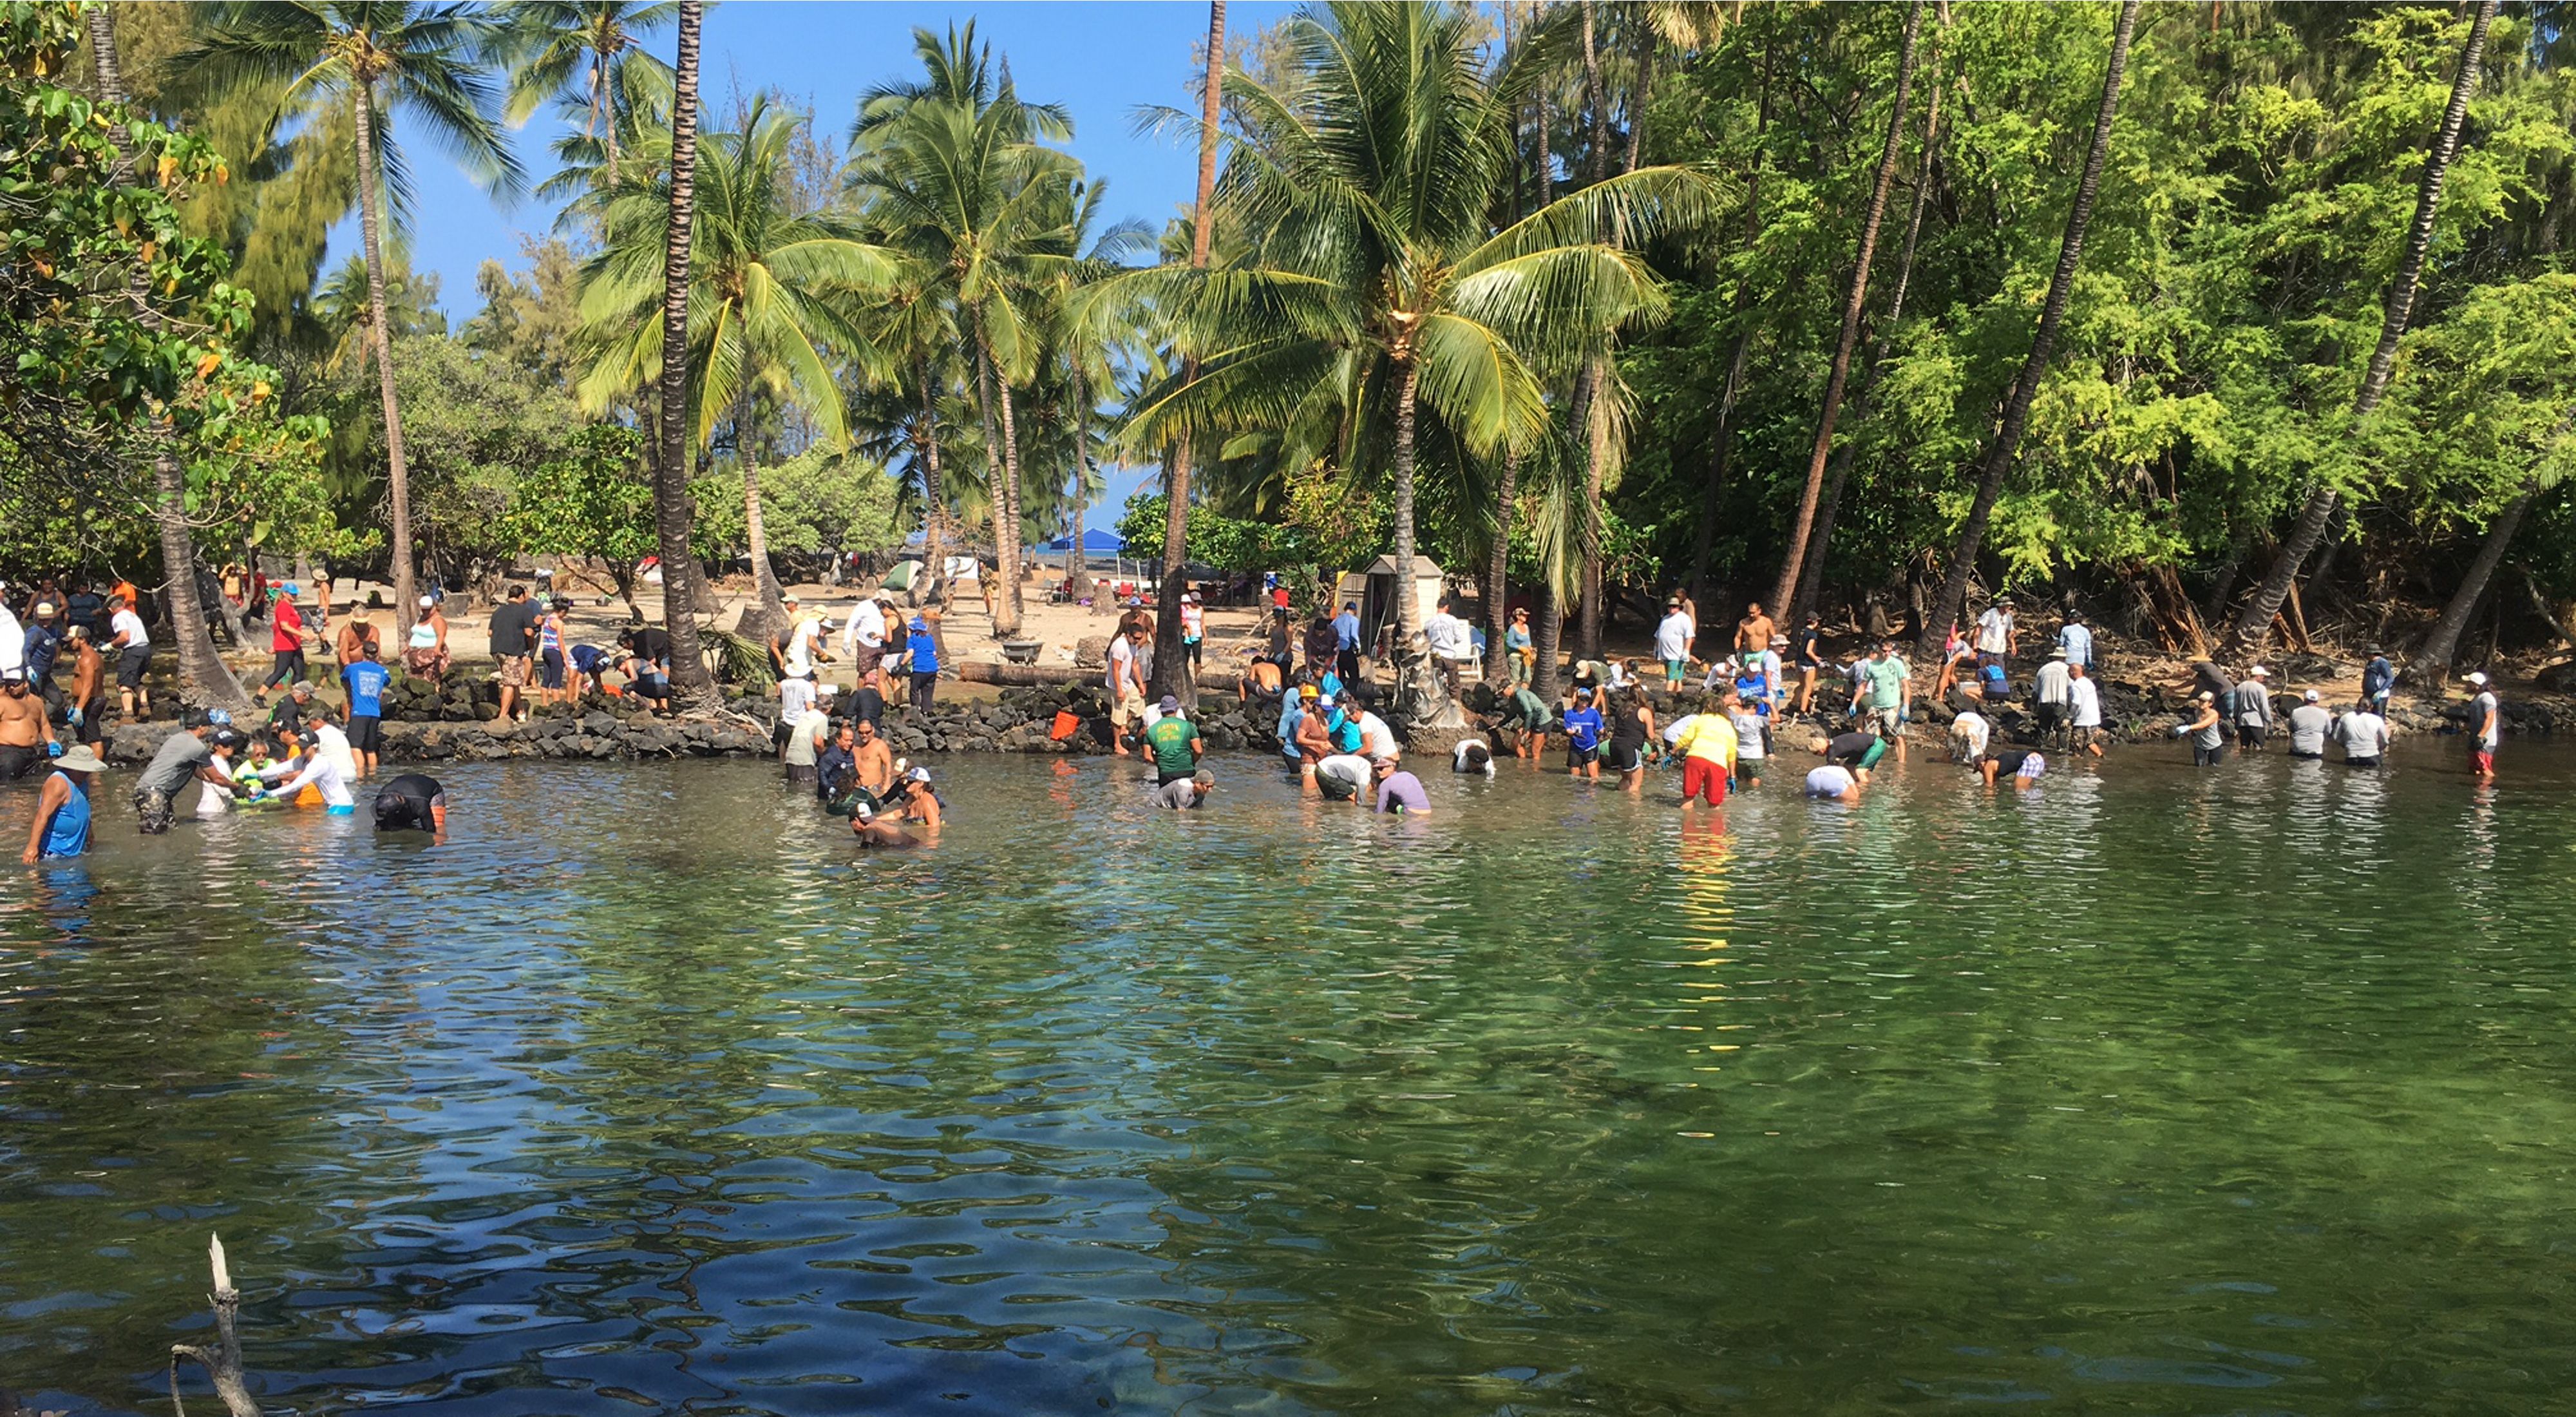 Dozens of people work in shallow water near shore to help restore fishponds in Hawaii.